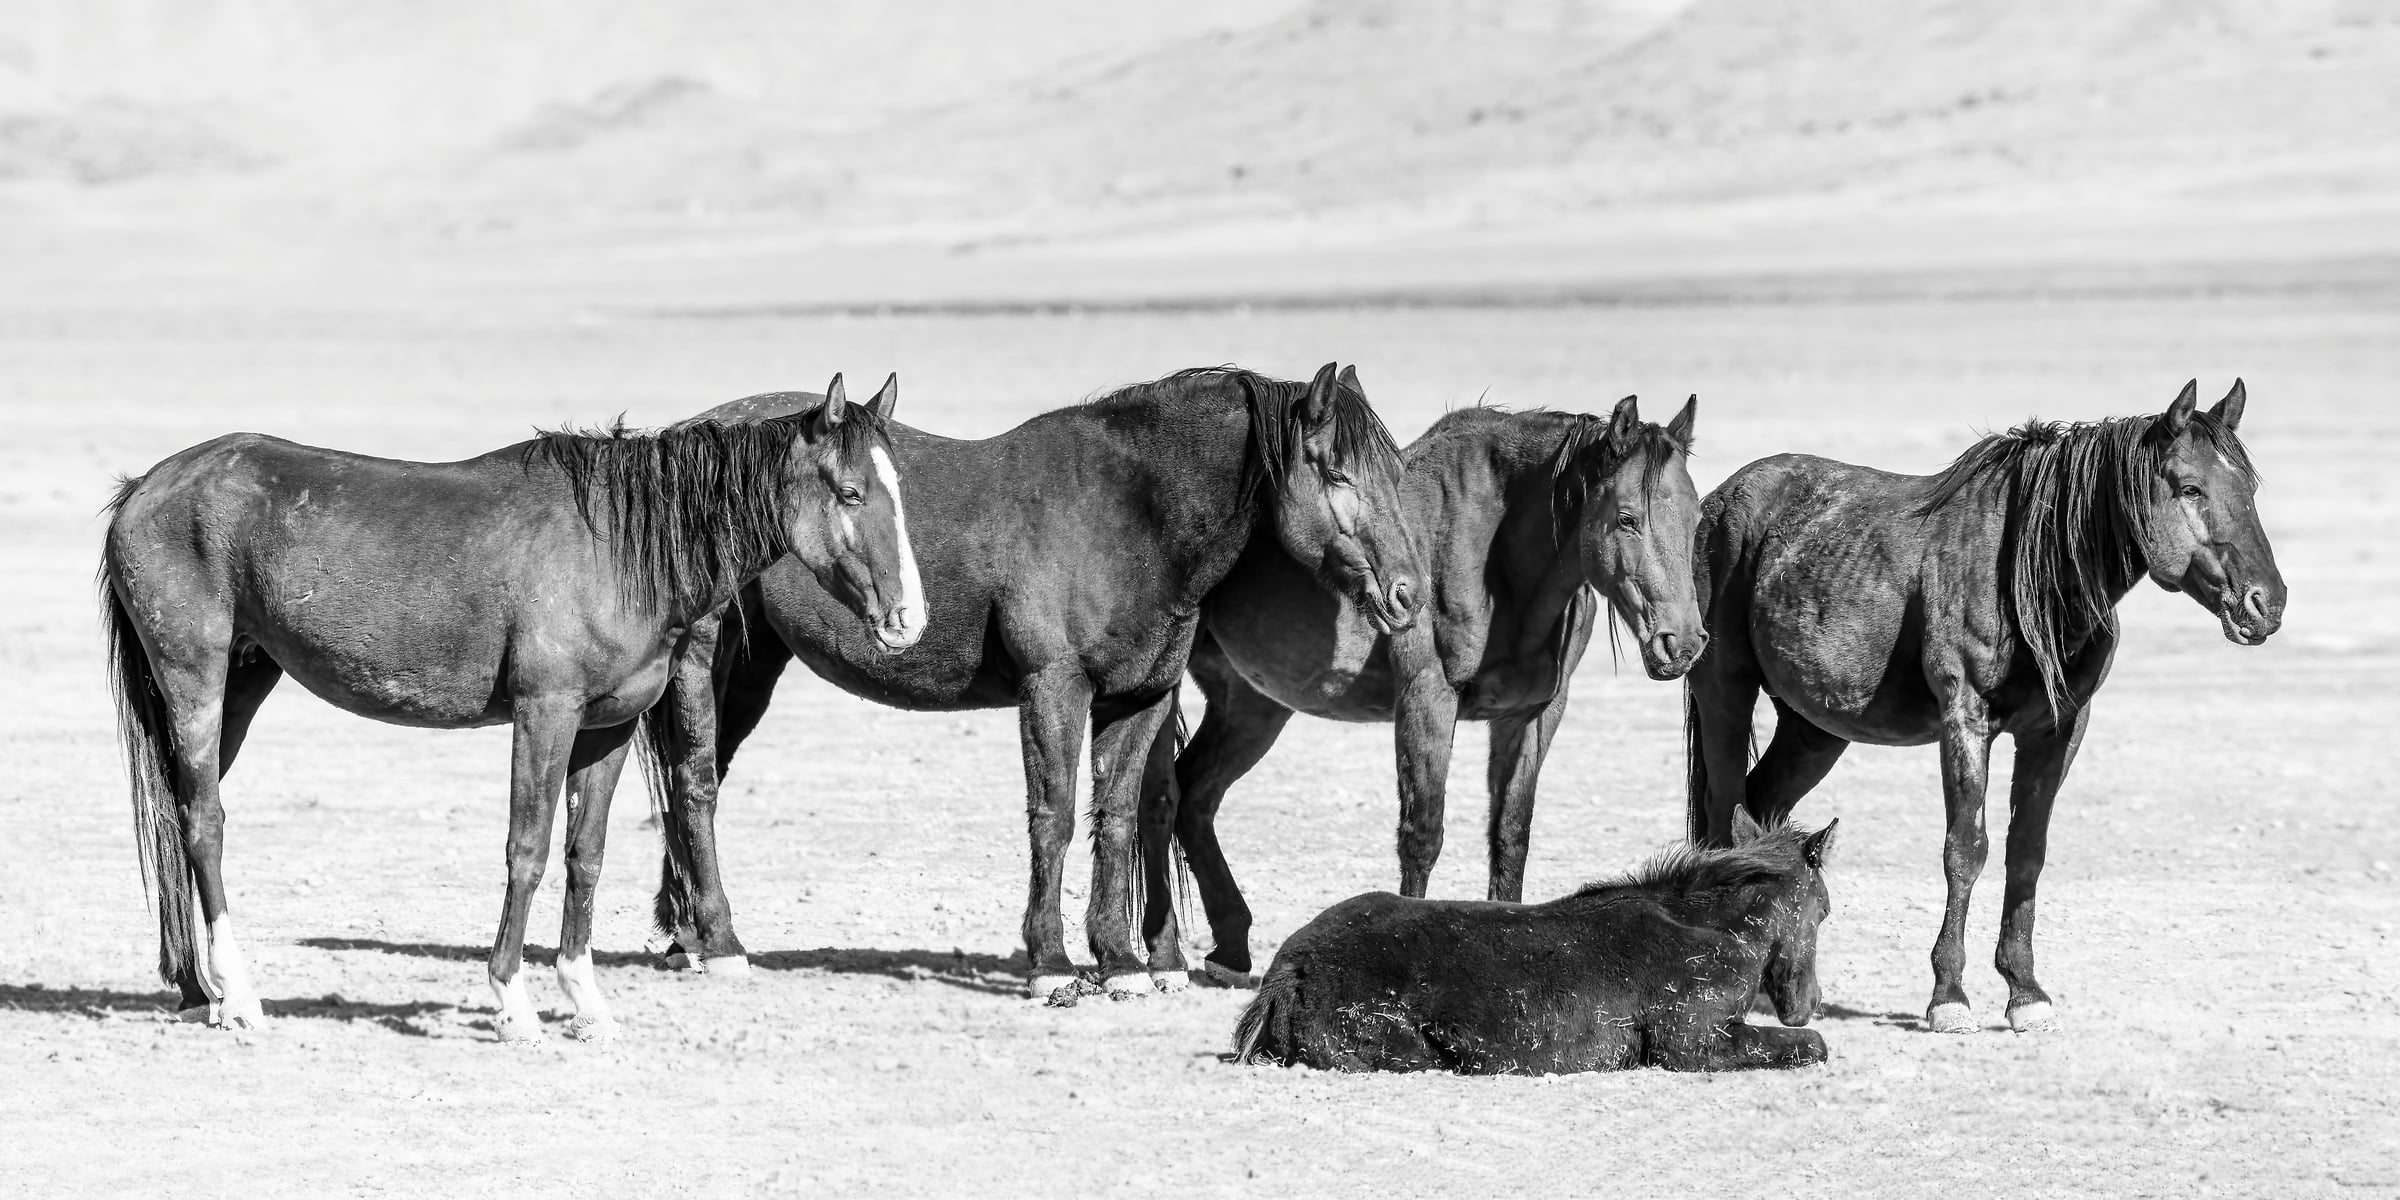 196 megapixels! A very high resolution, large-format VAST photo print of a group of horses standing in a desert; fine art photograph created by David David in Dugway Valley, Utah.